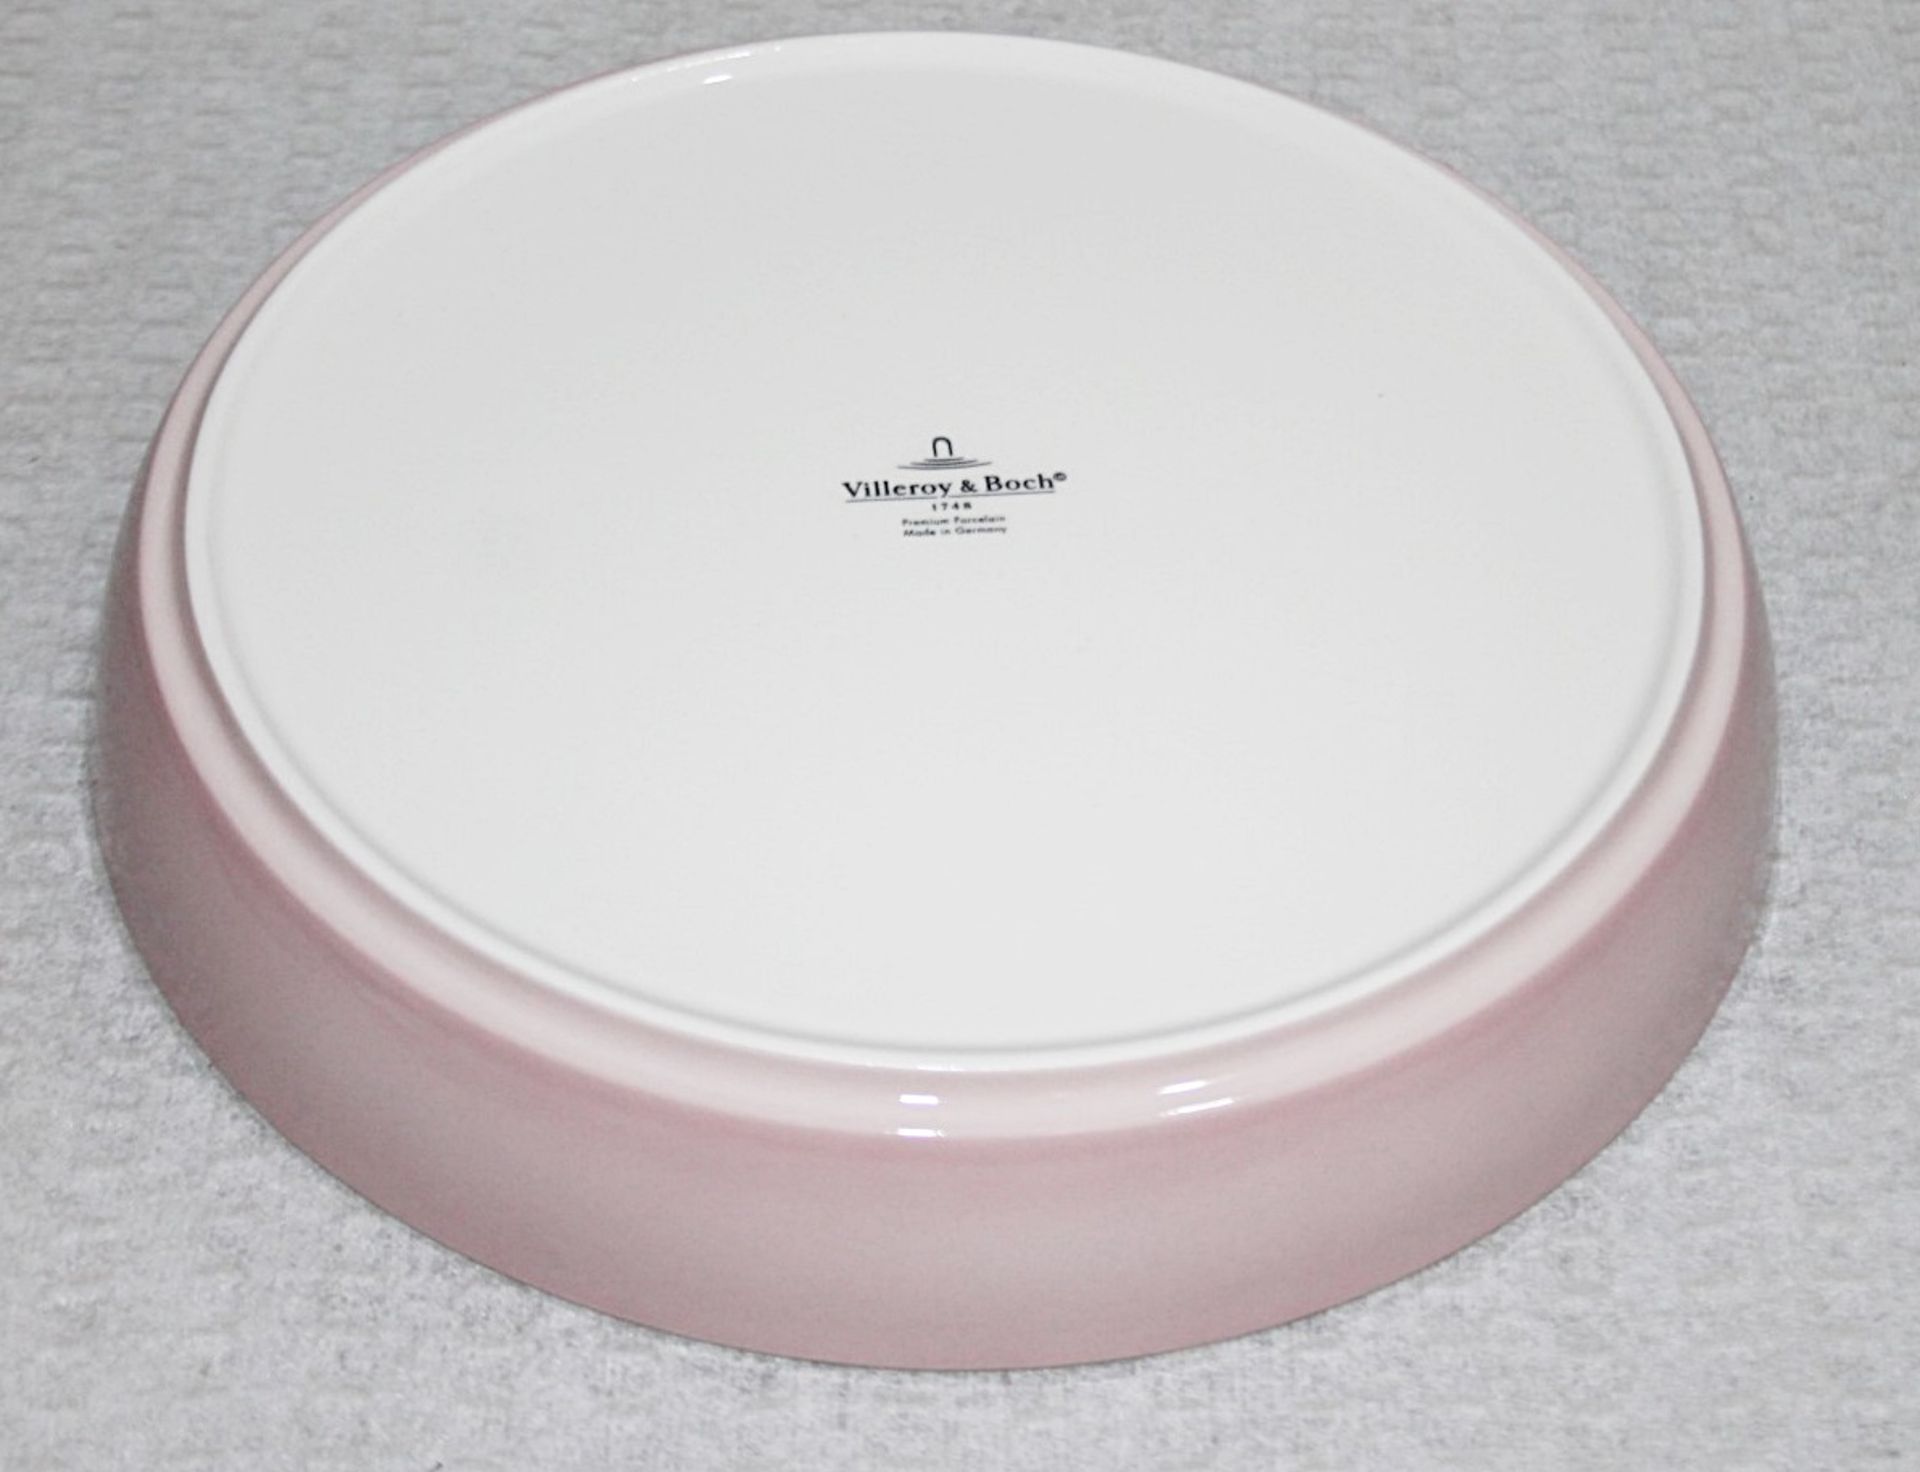 1 x VILLEROY & BOCH Porcelain Universial Flat Bowl With A Pink Band- Dimensions: ø23.5 x H3.7cm - - Image 3 of 5